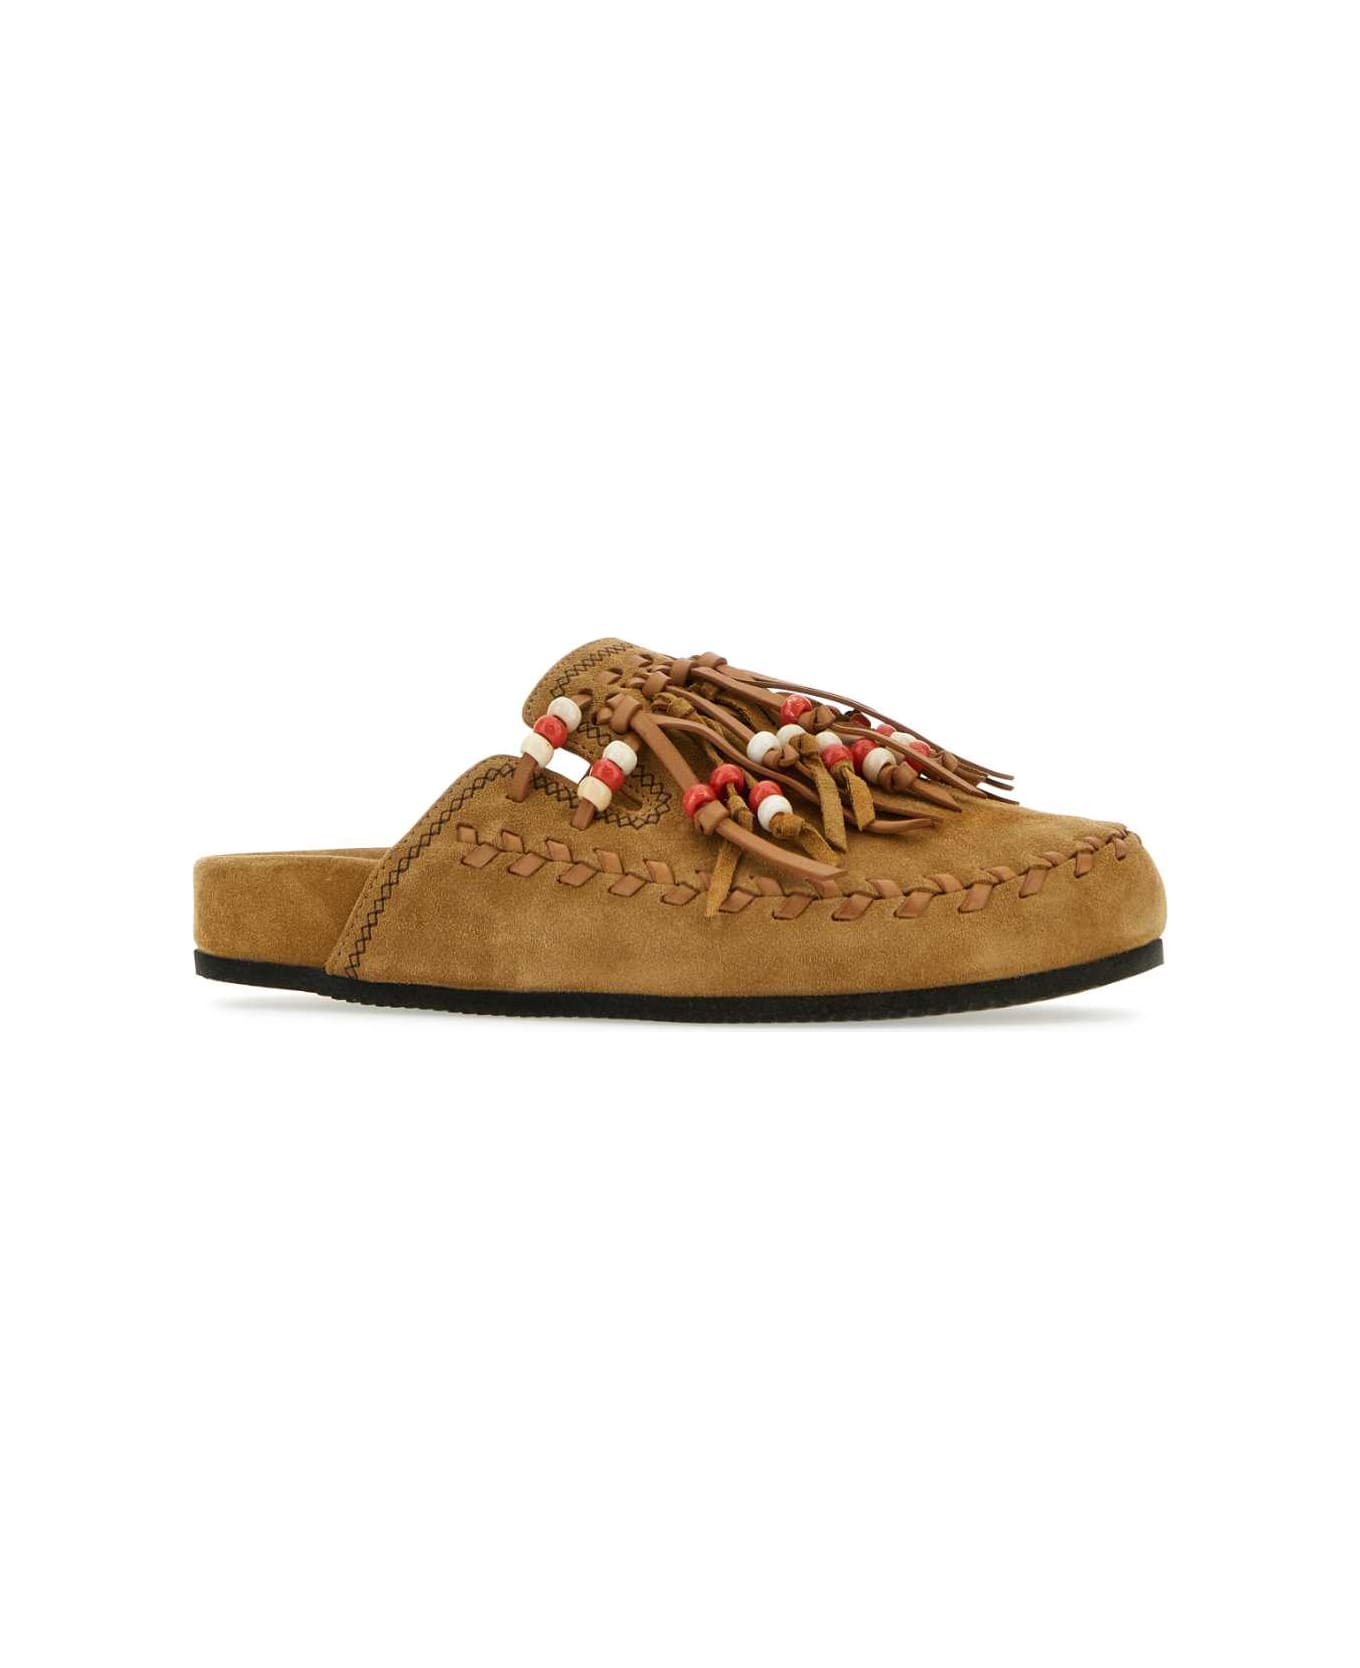 Alanui Biscuit Suede Leather Salvation Mountain Slippers - Multicolor